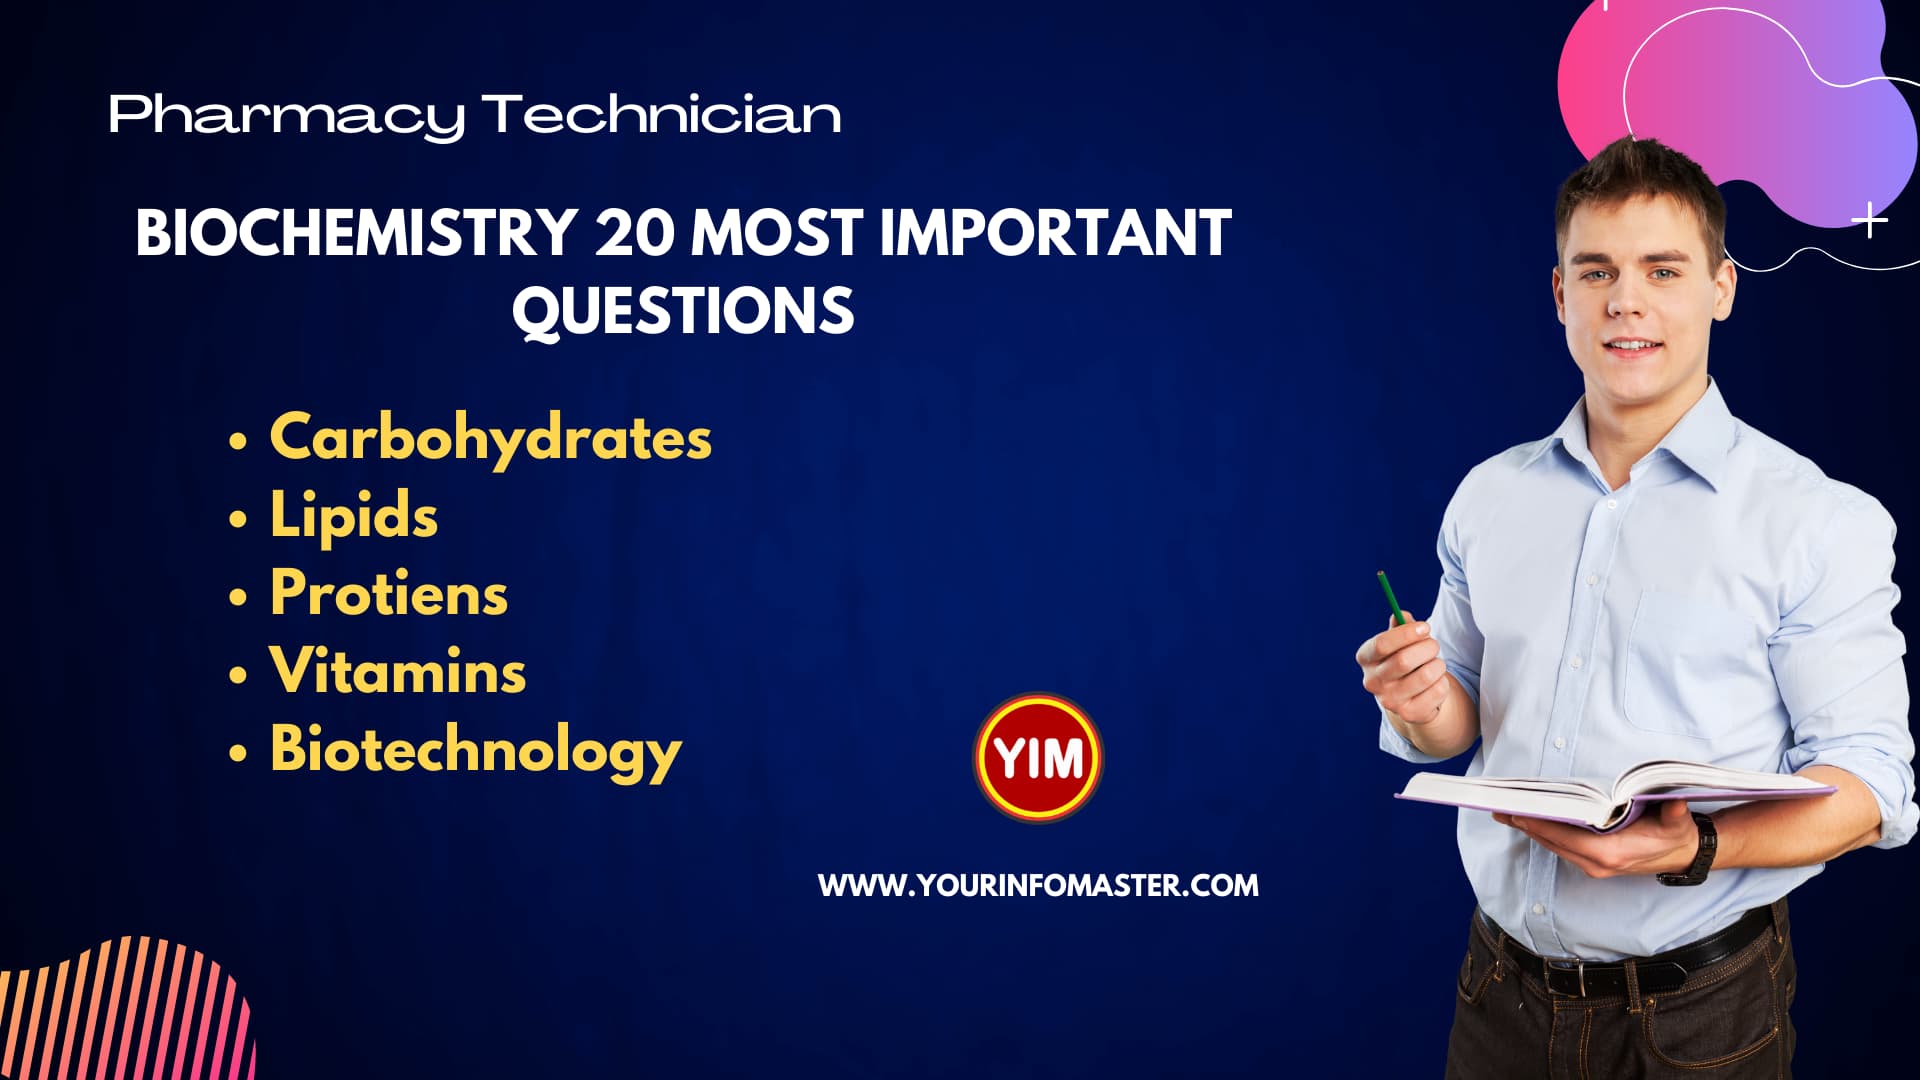 Biochemistry 20 Most Important Questions, Pharmacy Assistant, Pharmacy Technician, Pharmacy Technician Past Papers, Pharmacy Technician Syllabus